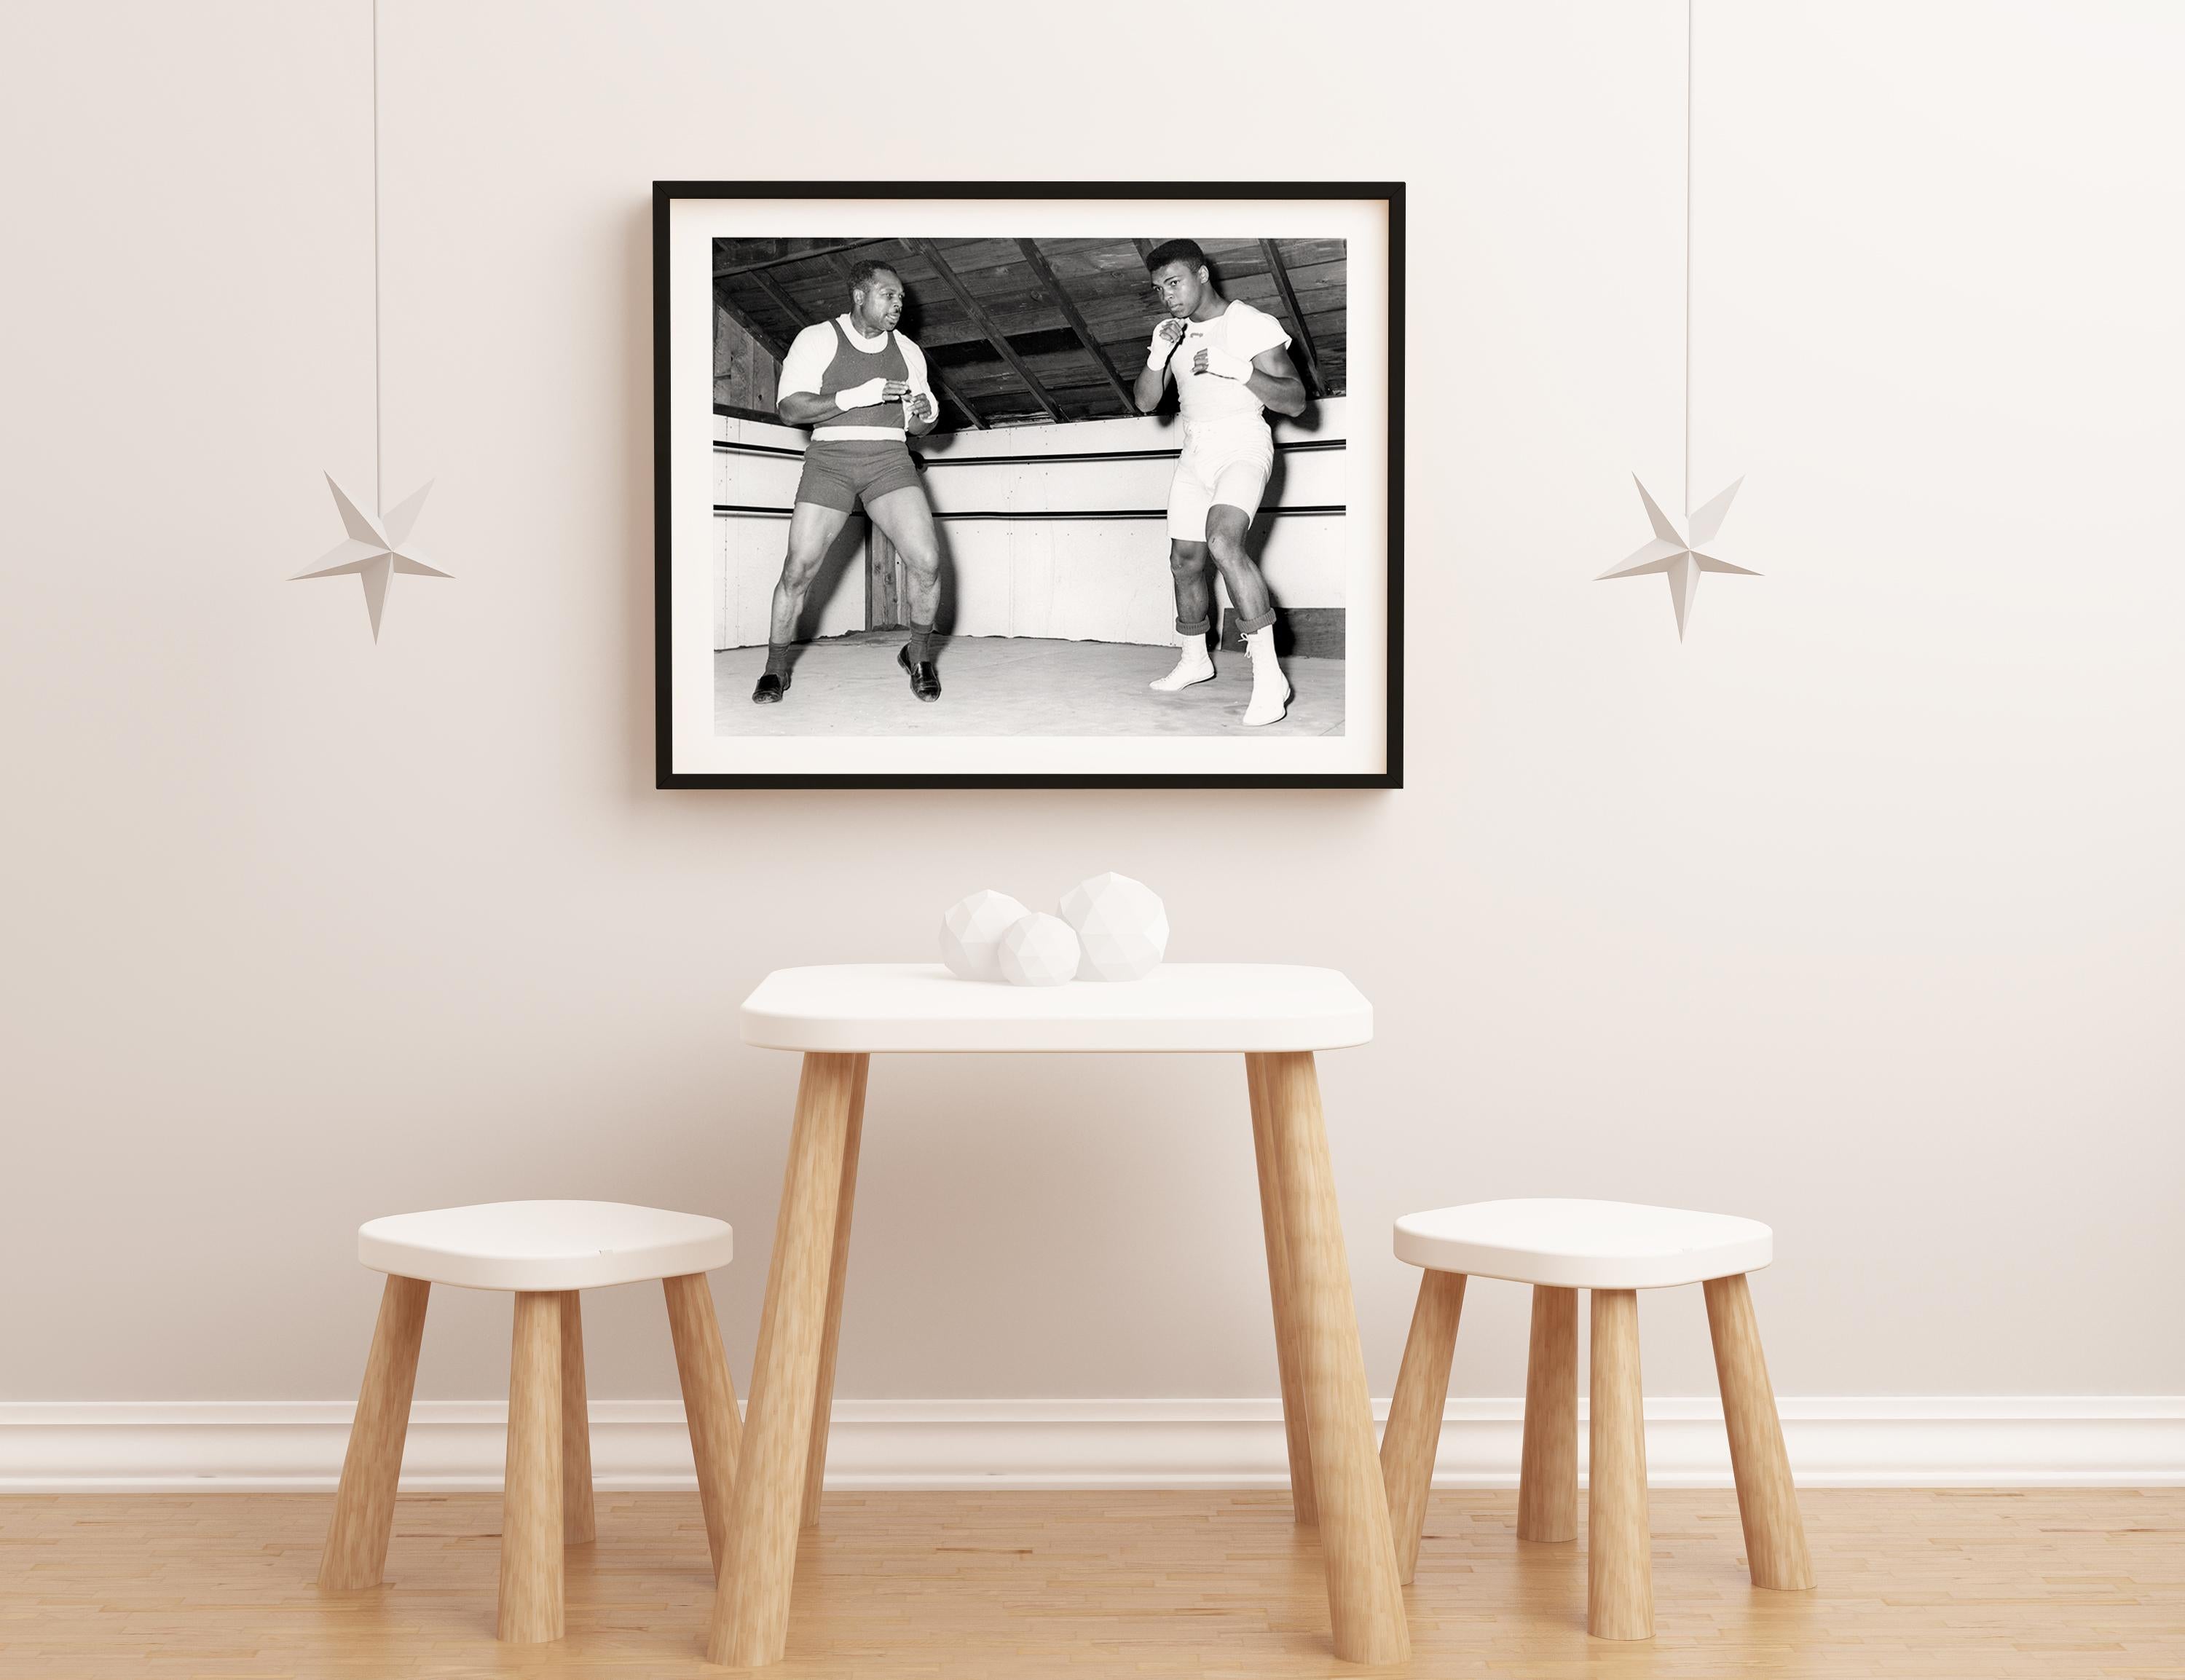 Archie Moore and Muhammad Ali at Archie Moore's Salt Mine Training Camp, near Ramona, California in 1957.

16” x 20”, edition of 125
Archival Pigment Print on Fiber-Based Paper
Produced from the original 8